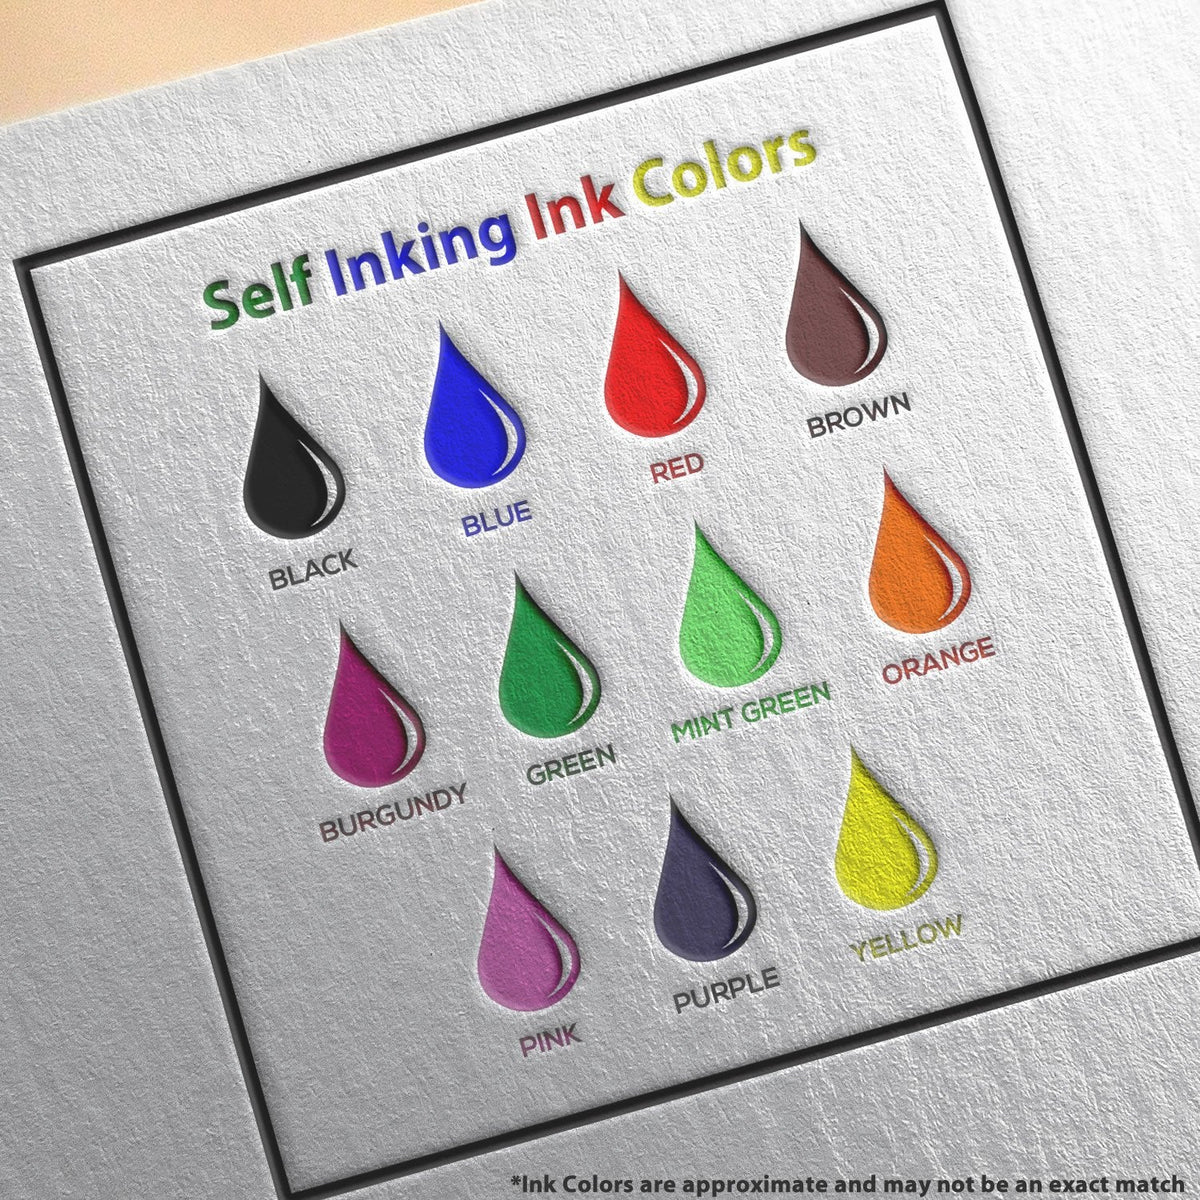 Self-Inking Recibido Stamp Ink Color Options